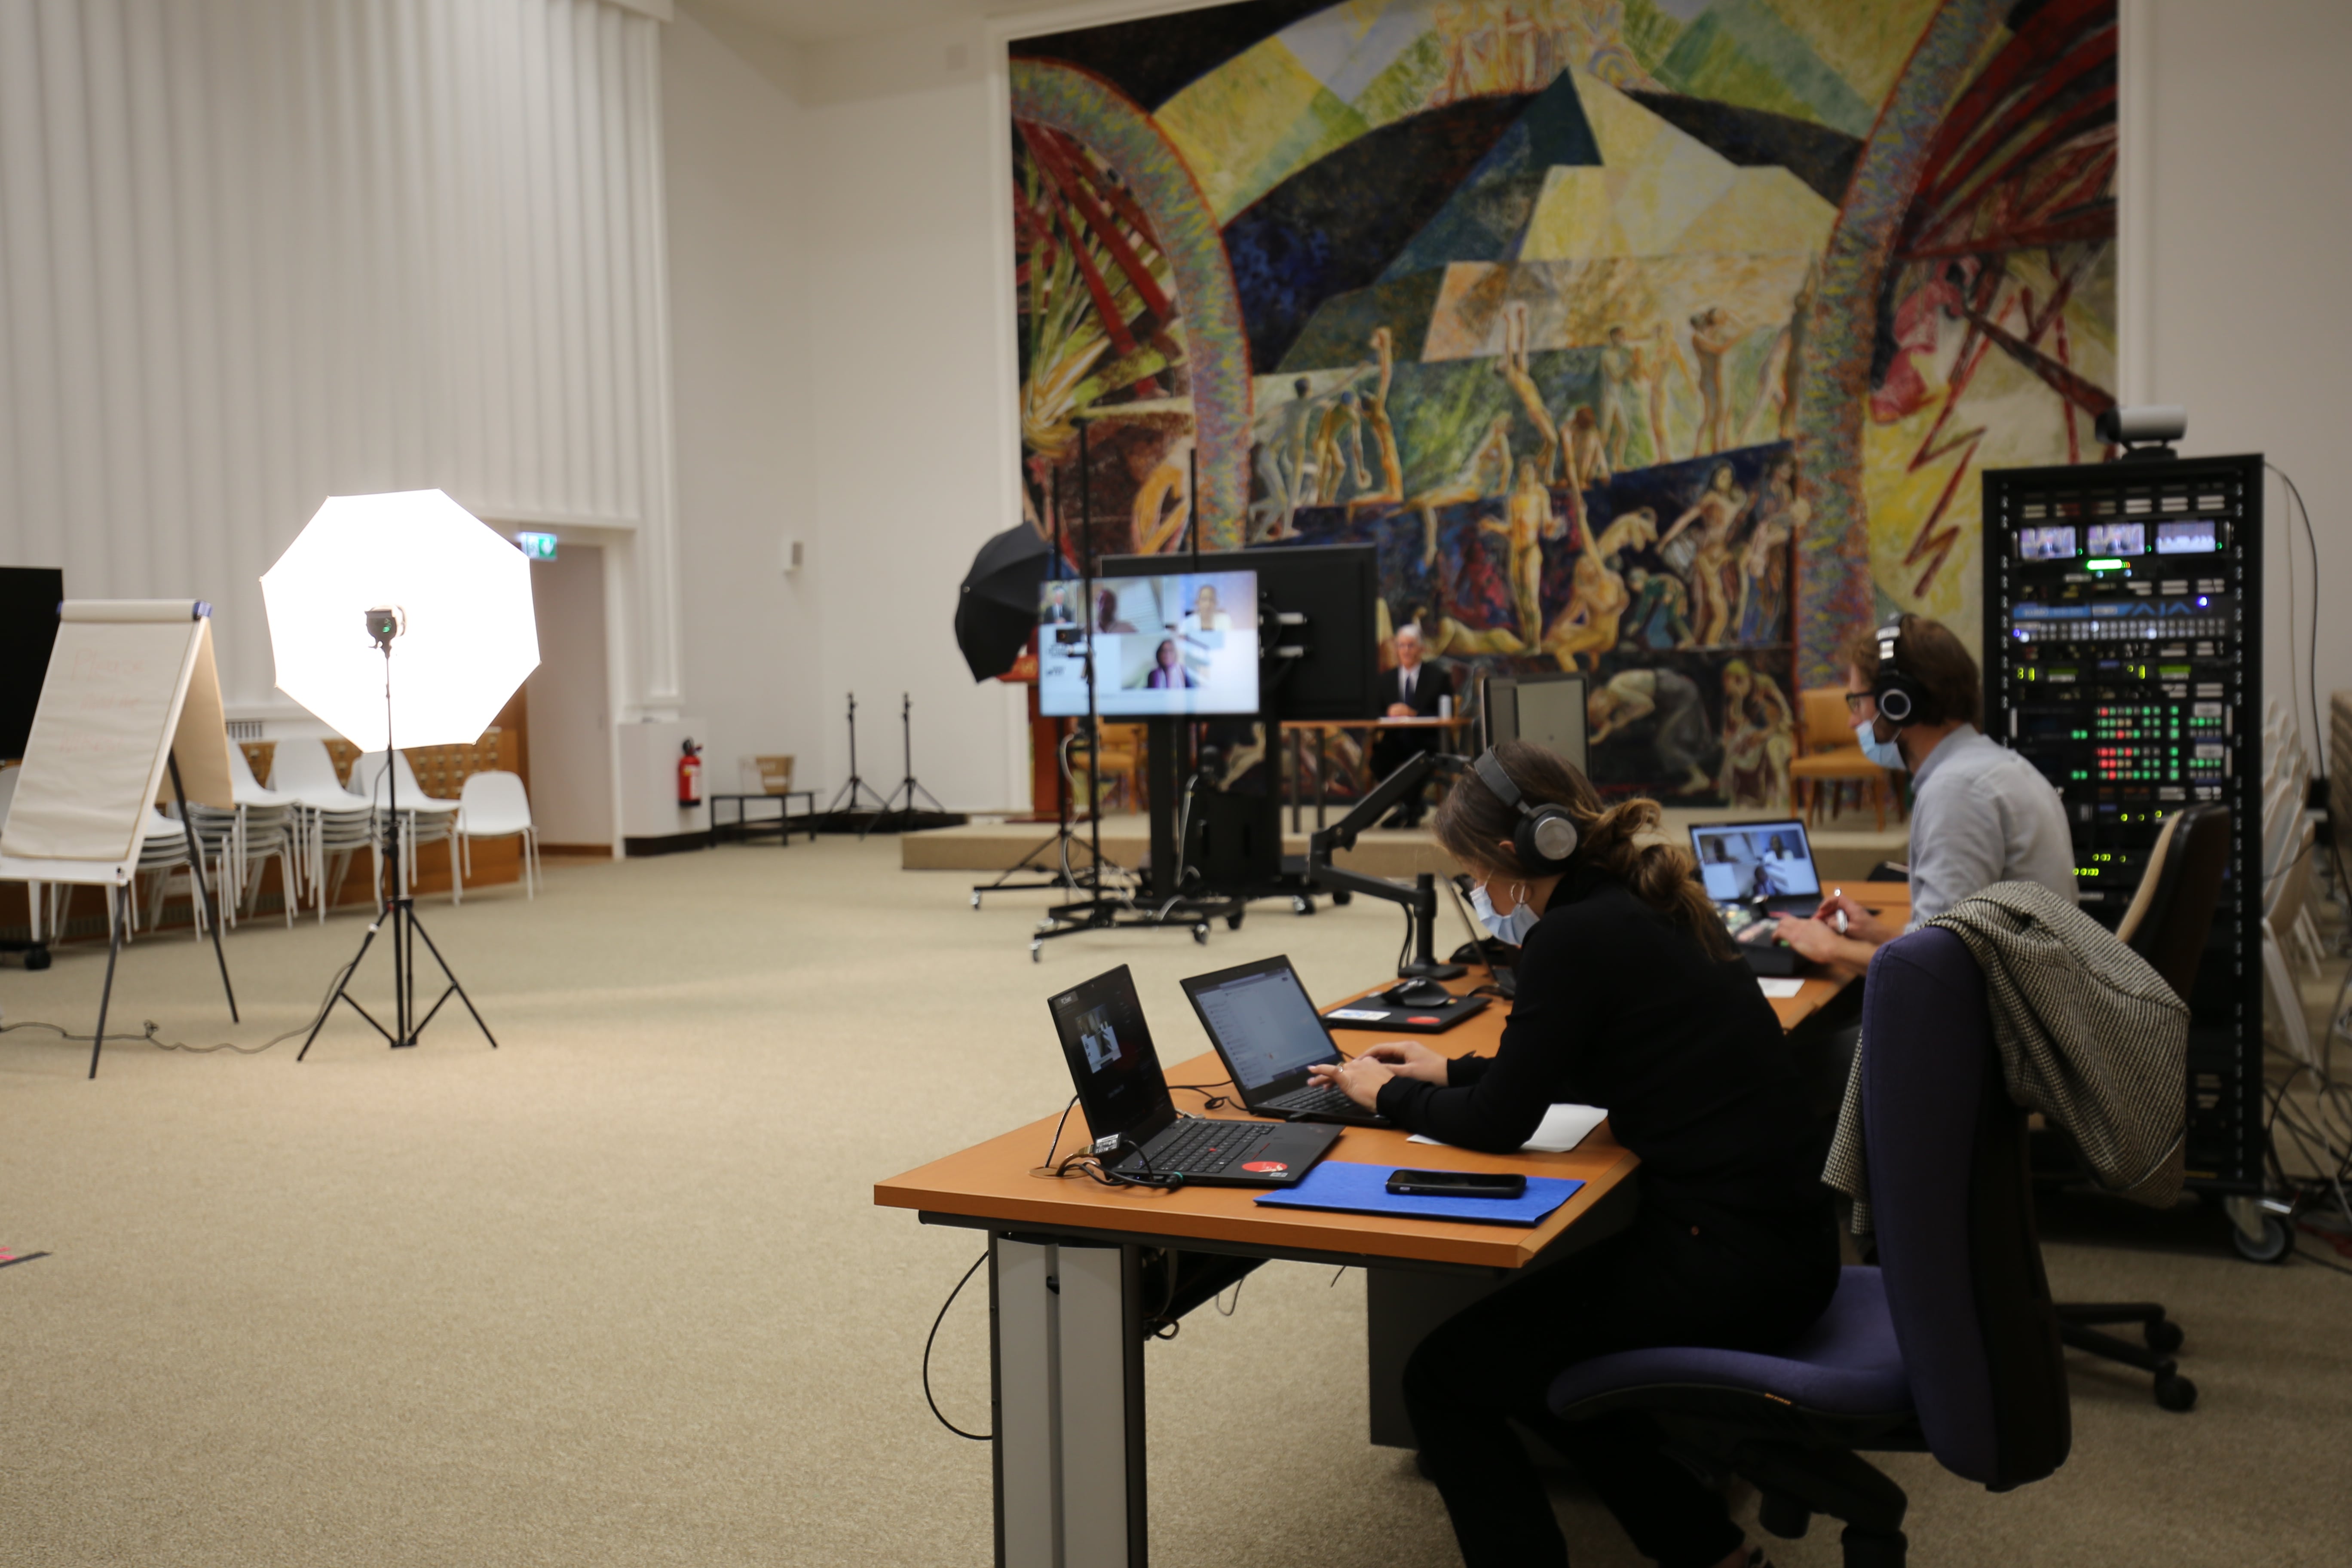 A photo of a large room with a mural at the end of it. On the right, two people are seated at a long desk. They are working at laptops in front of them and wearing headphones and facemasks. More equipment is next to them. On the left there is a flip chart and lighting equipment. At the back of the room, in front of the mural, is a large television screen and more lighting equipment.  